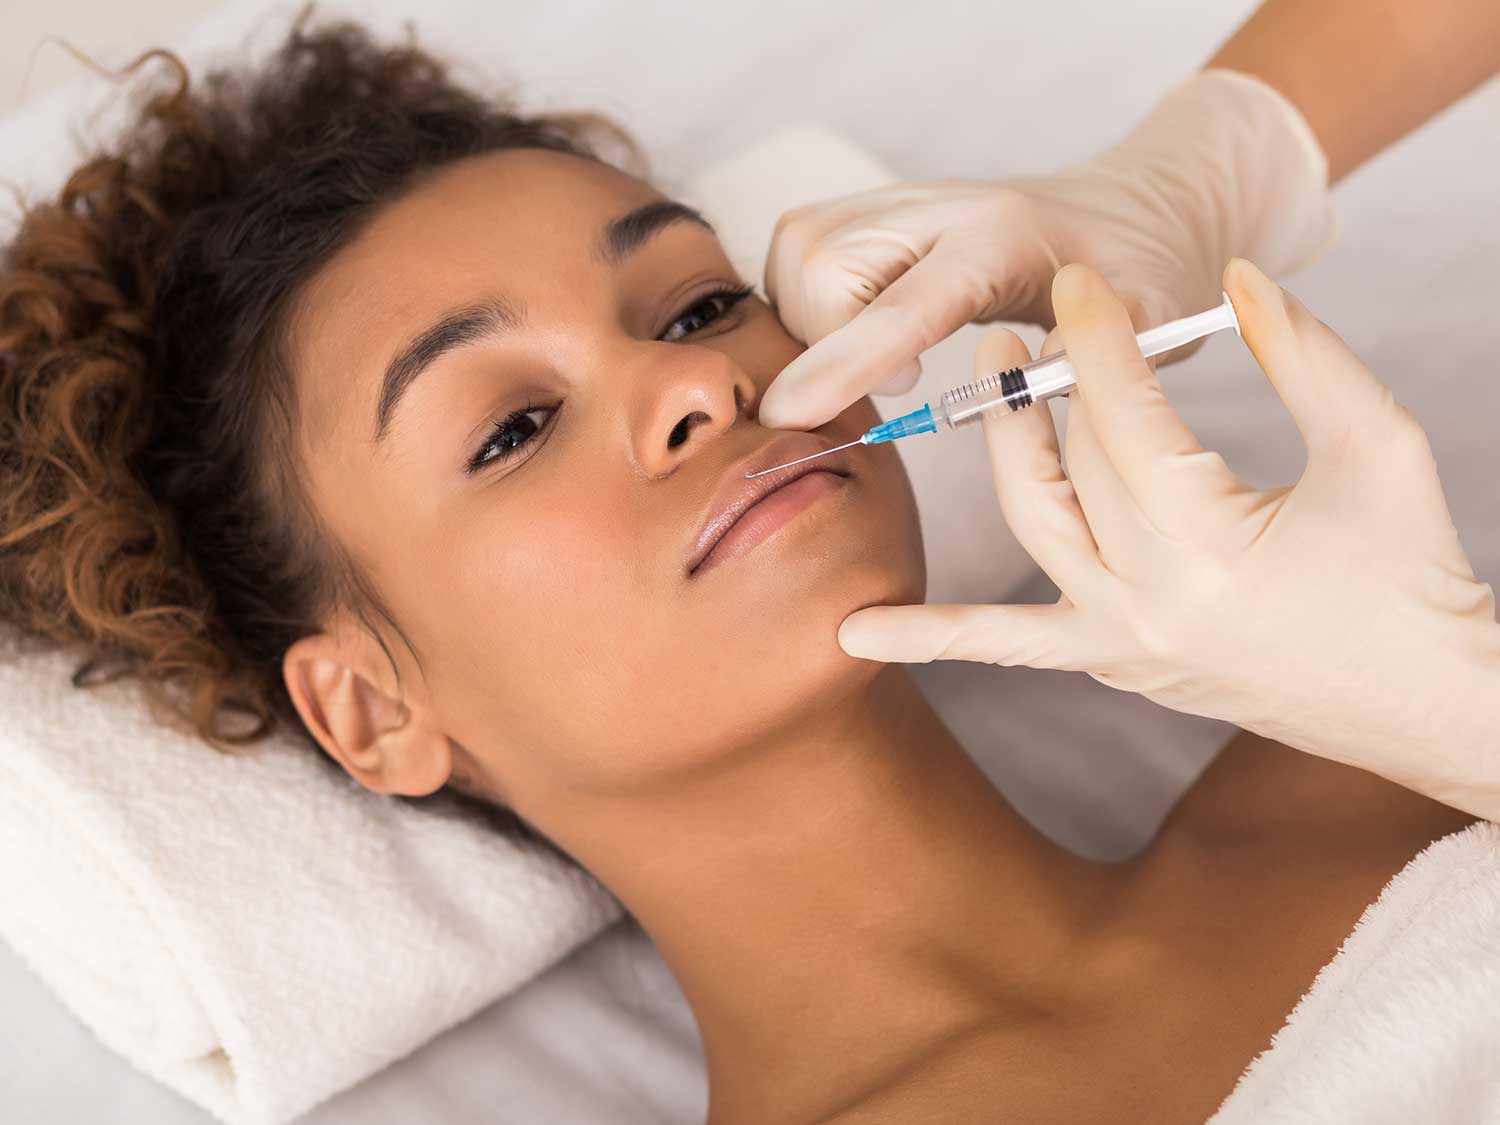 A Patient Receiving A Lip Injection At A Medical Spa With Specialized Malpractice Insurance